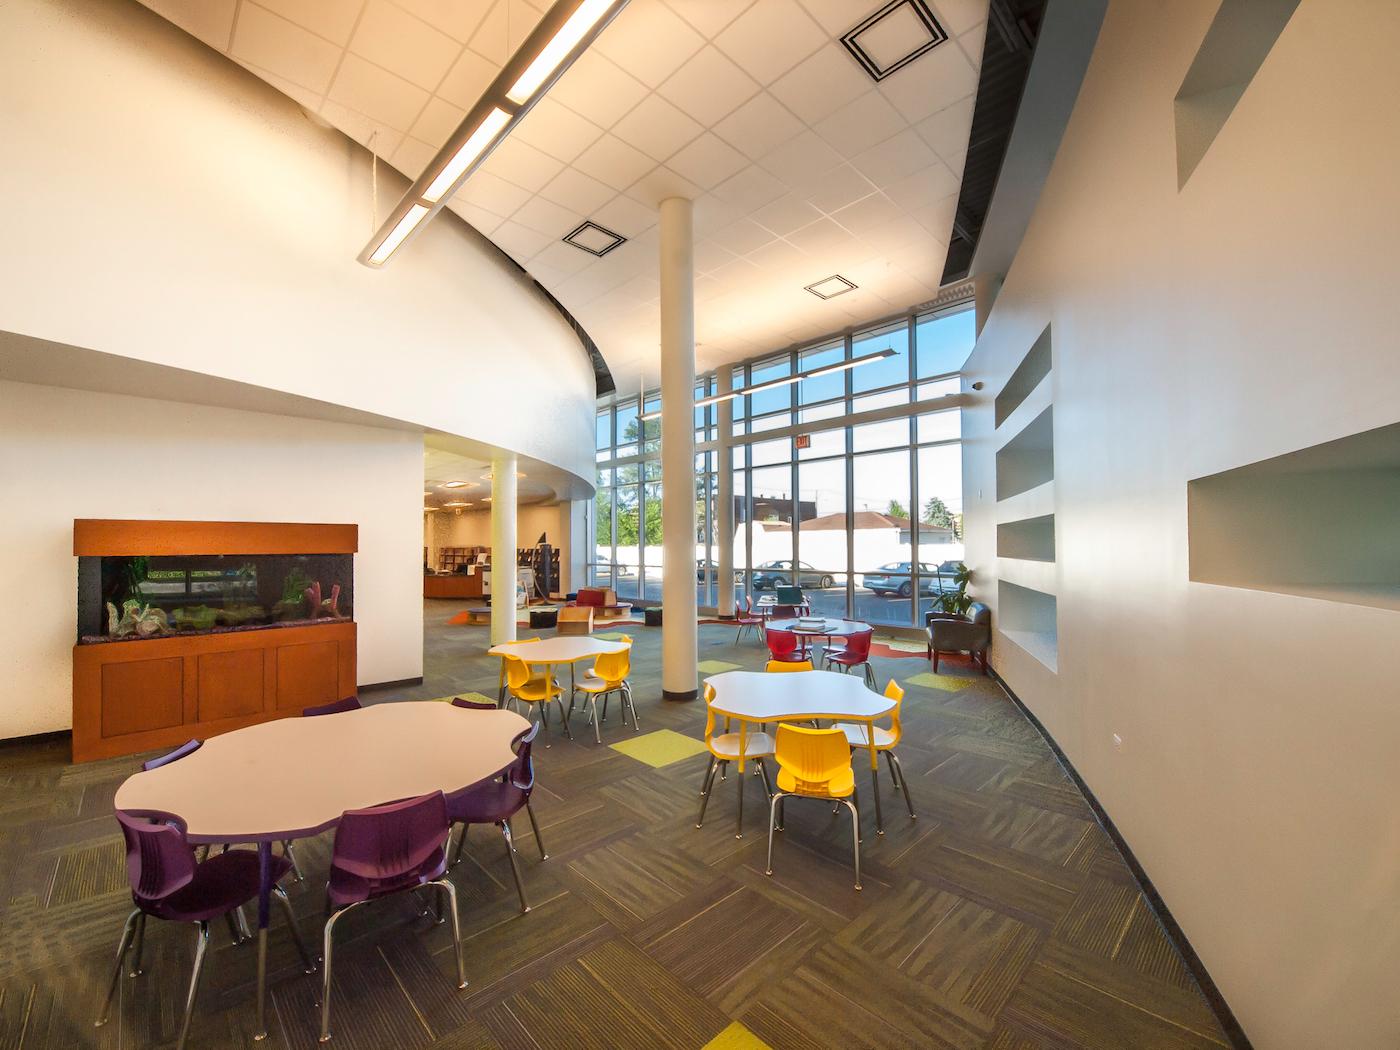 The interior of the Harvey Public Library. Photo: Lee Bey